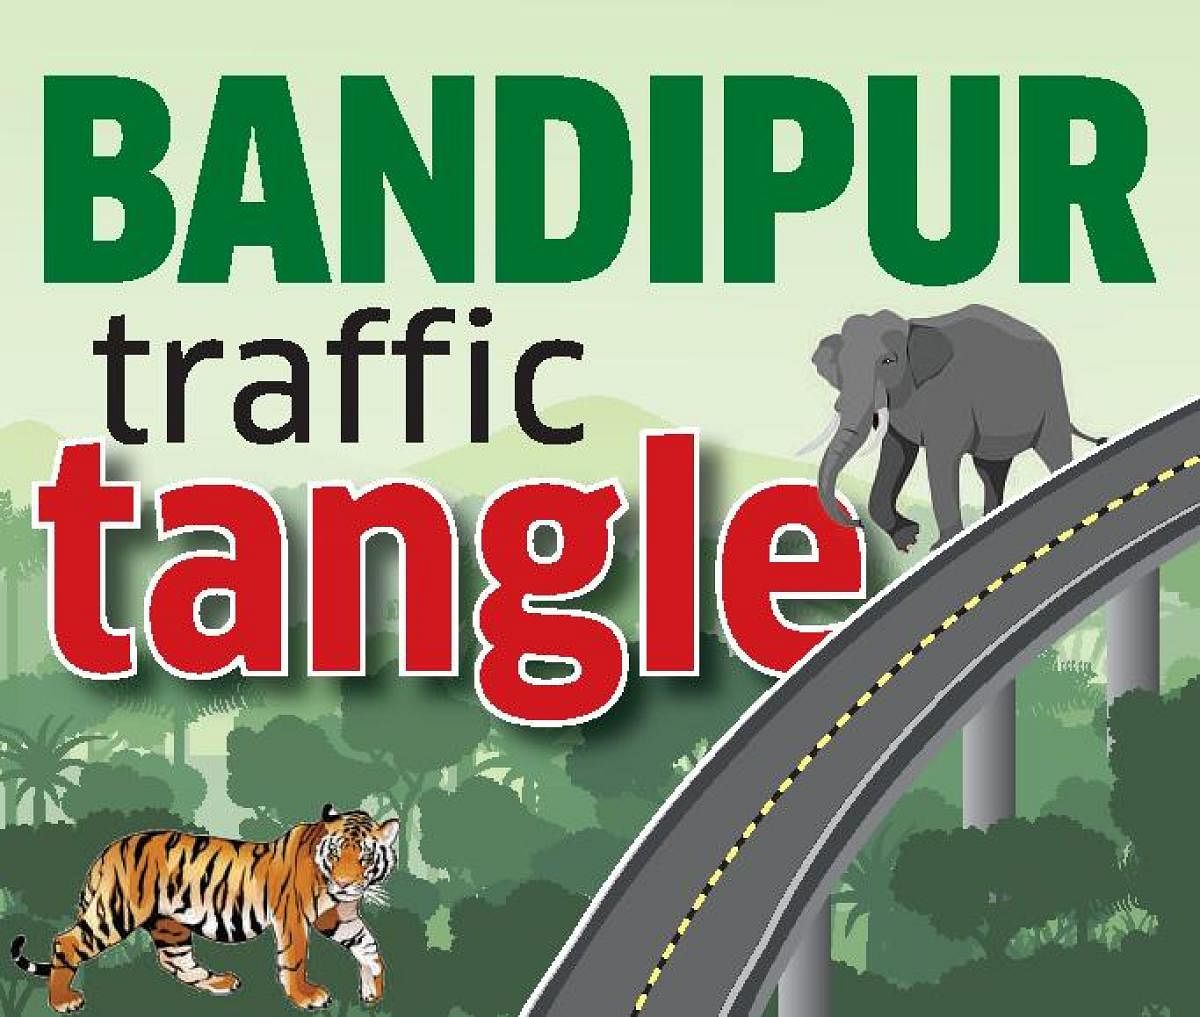 No decision on elevated road in Bandipur